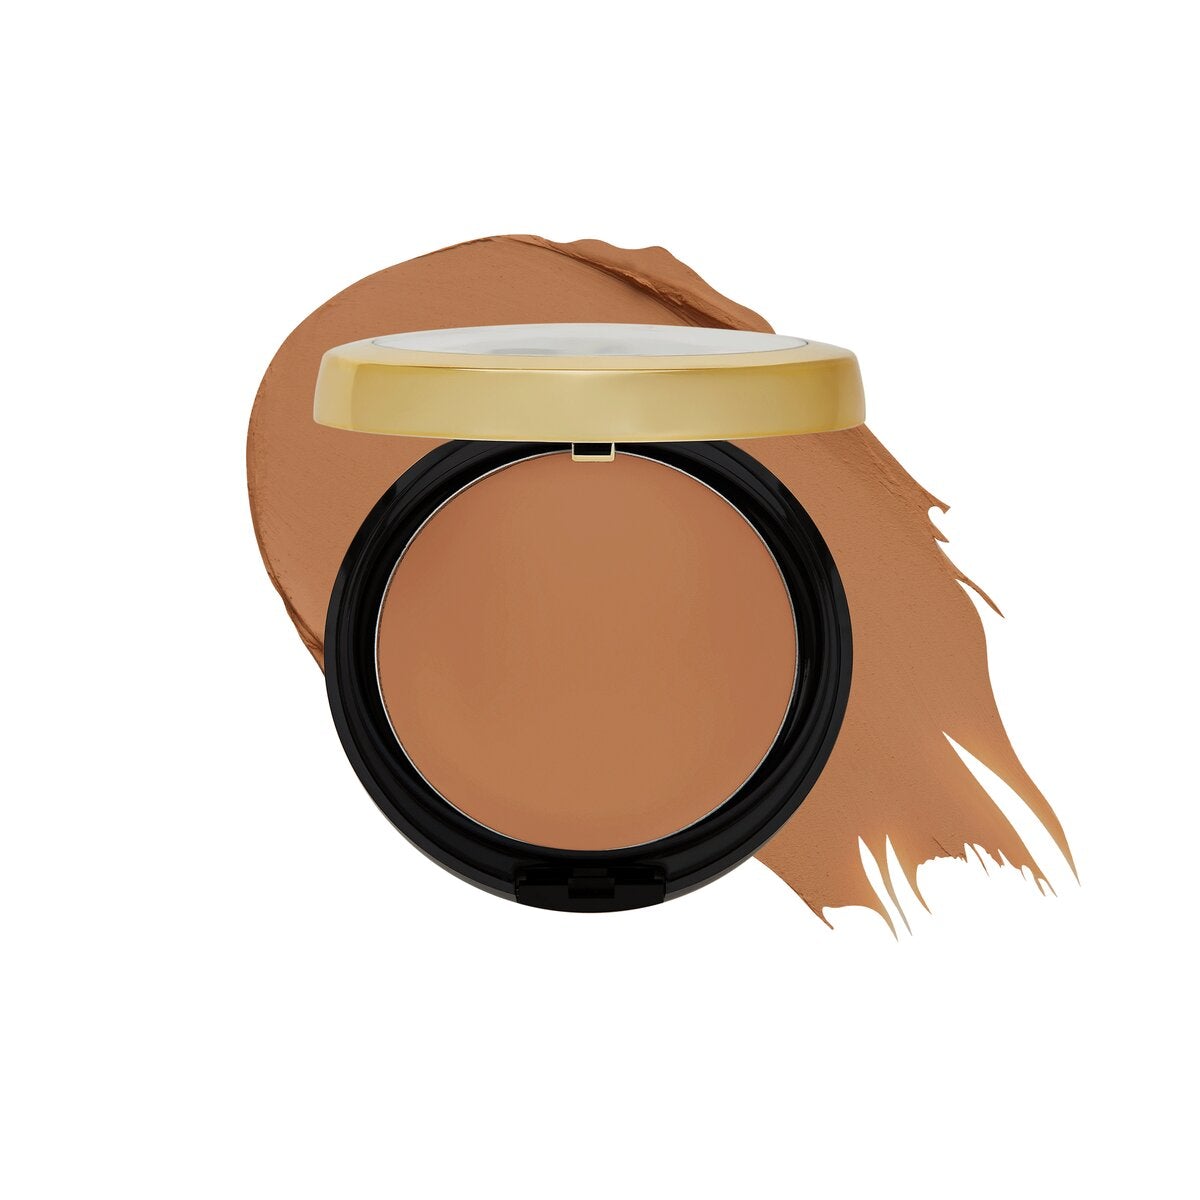 CONCEAL AND PERFECT CREAM TO POWDER FOUNDATION AMBER - MILANI